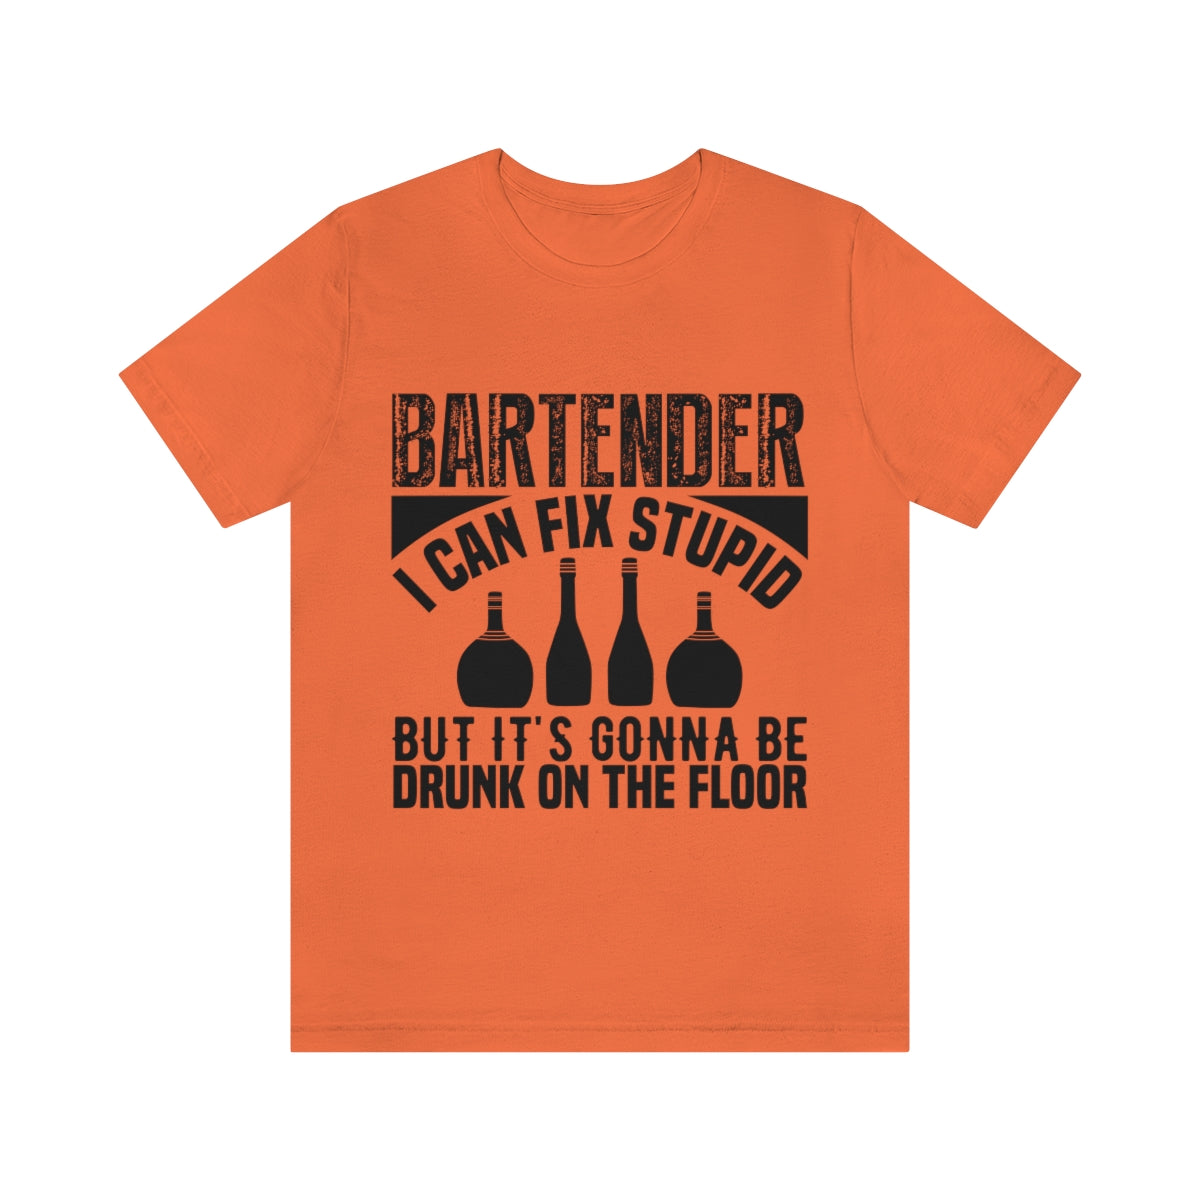 Bartender I Can Fix Stupid Bit Its Gonna Be Drunk of the Floor - Unisex T-Shirt